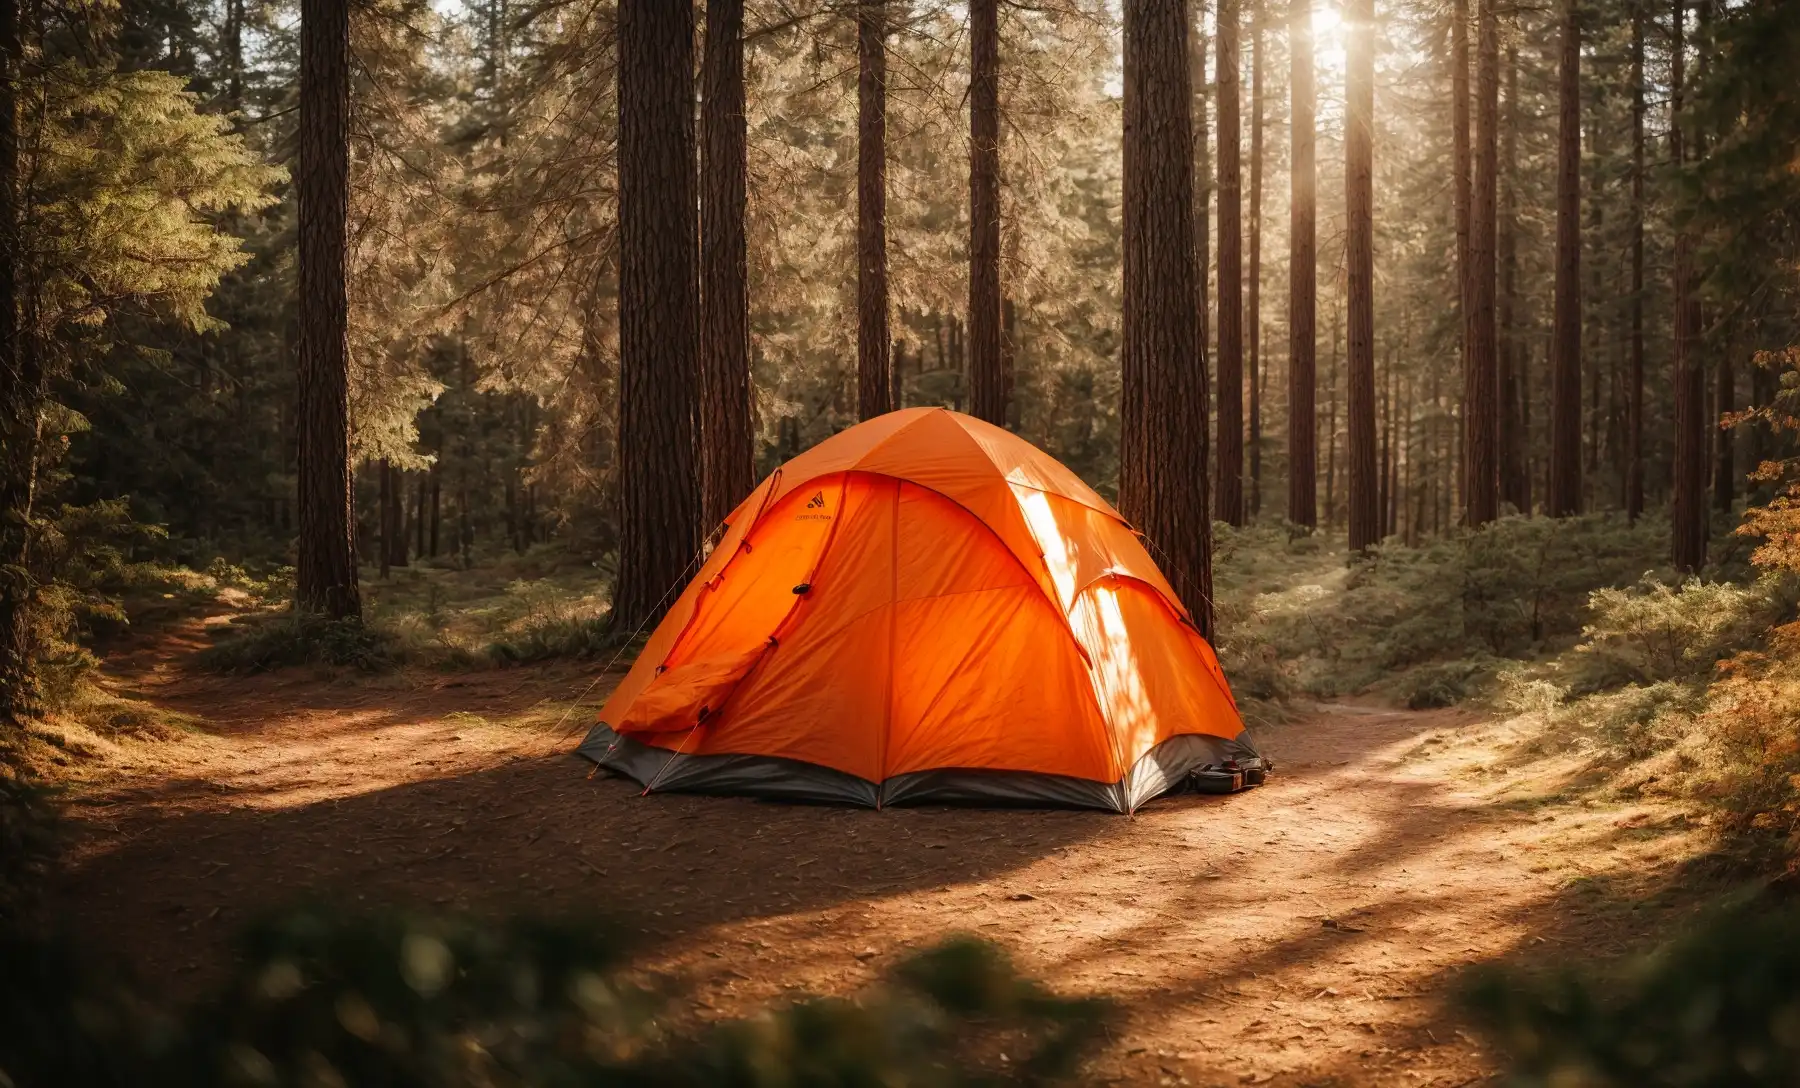 A Camping Tent